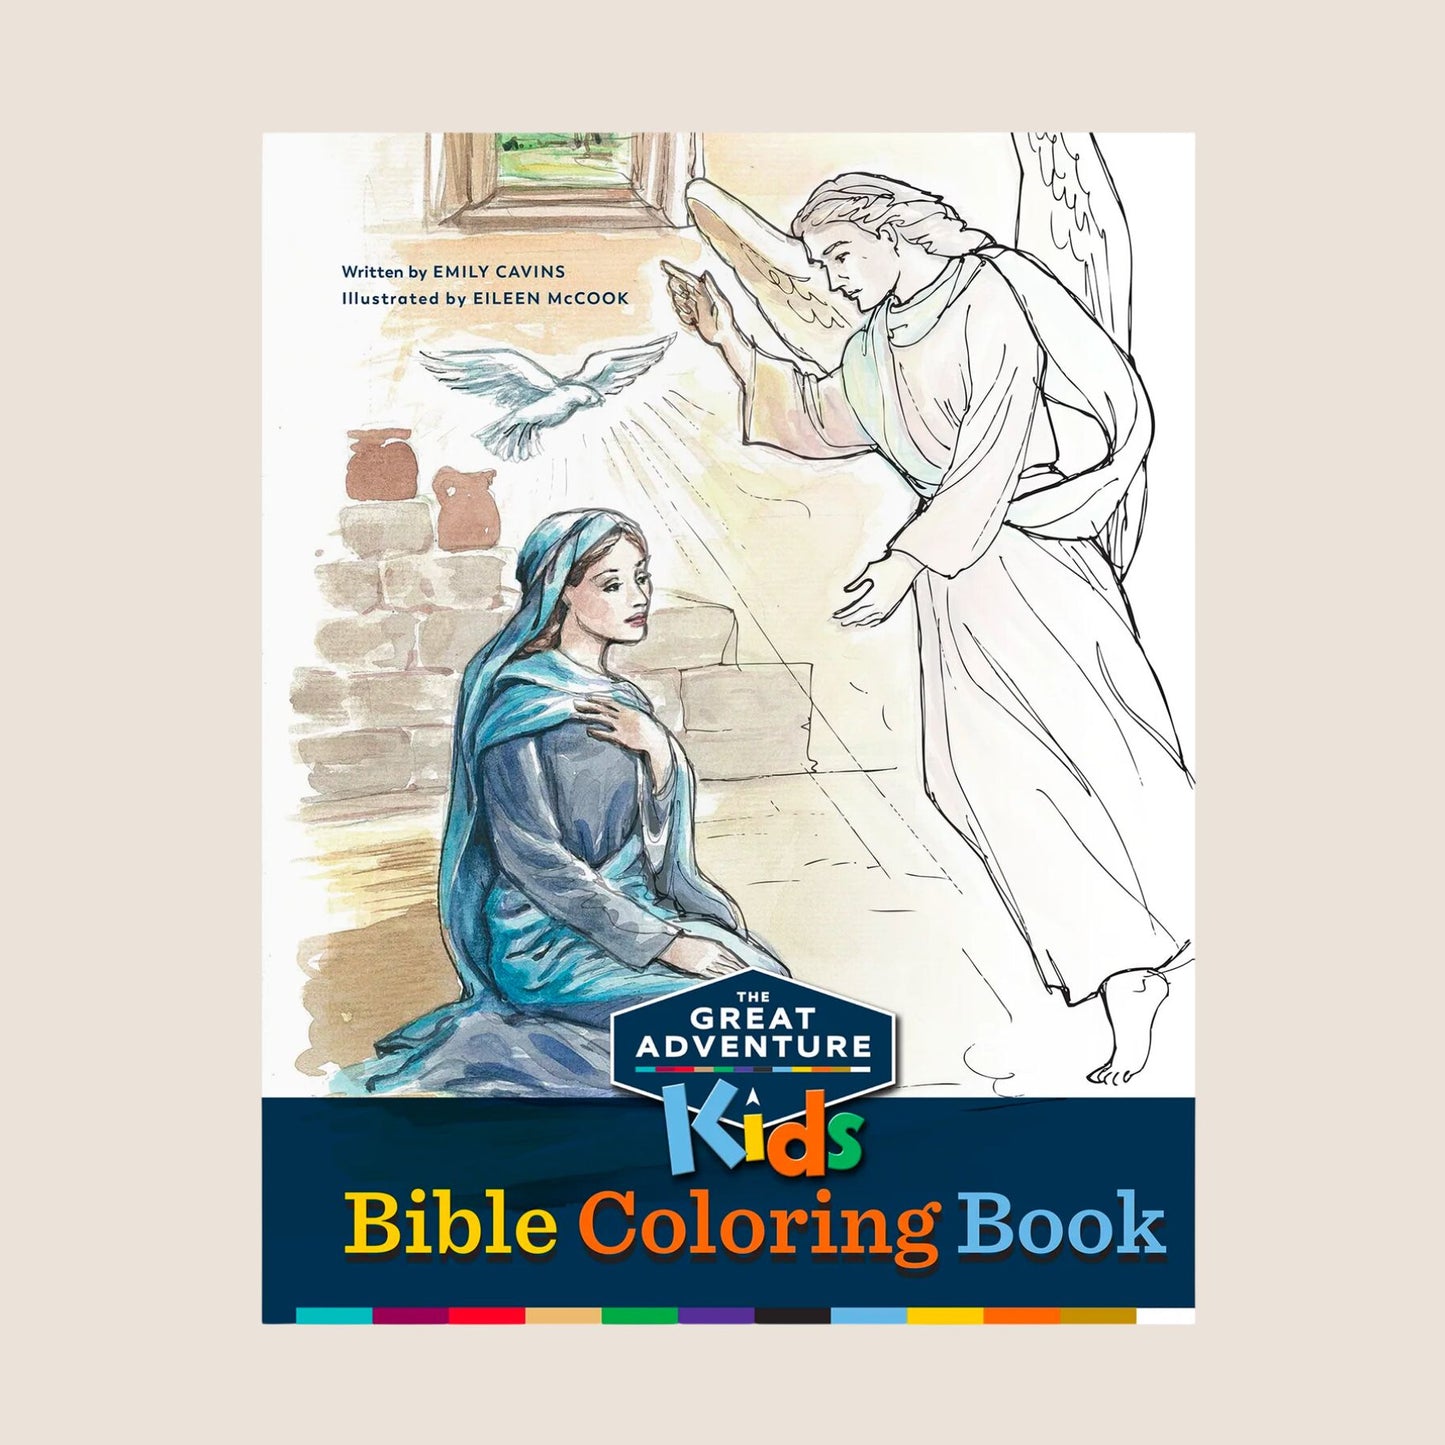 [PRE-ORDER] The Great Adventure Kids Bible Coloring Book